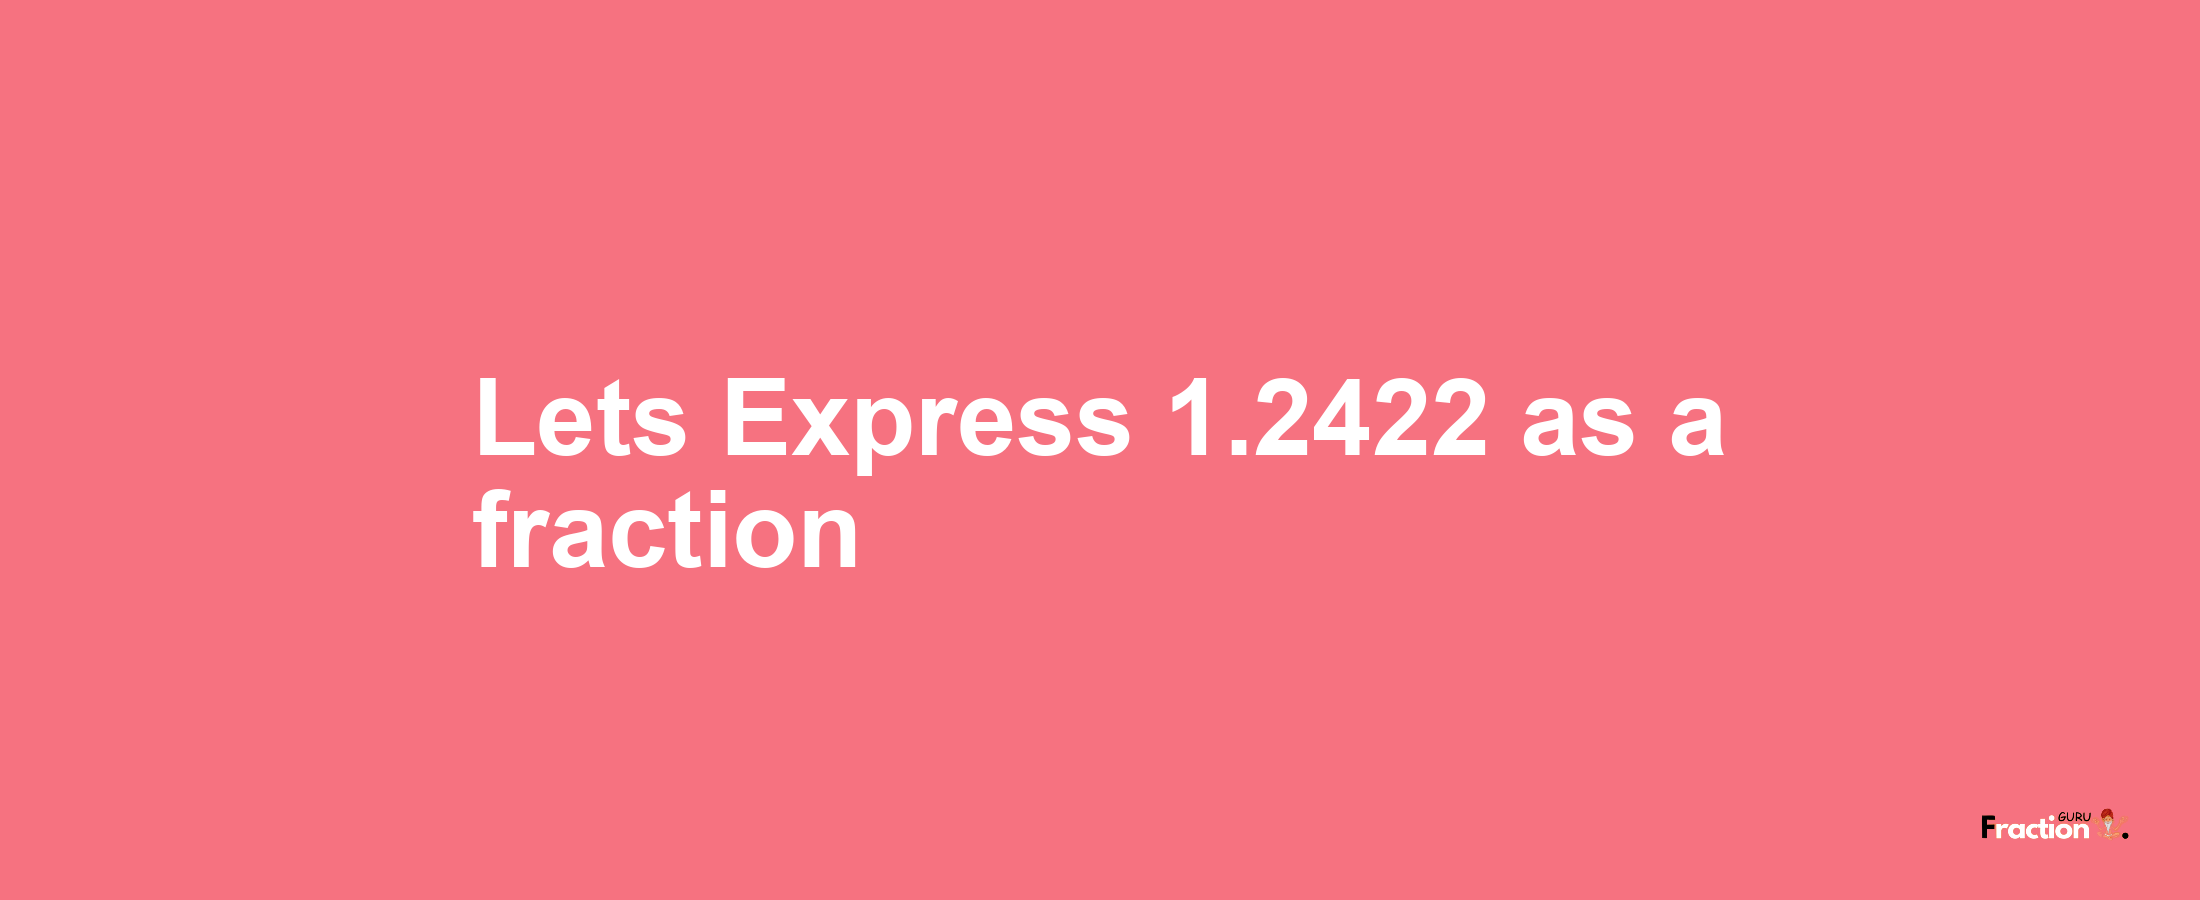 Lets Express 1.2422 as afraction